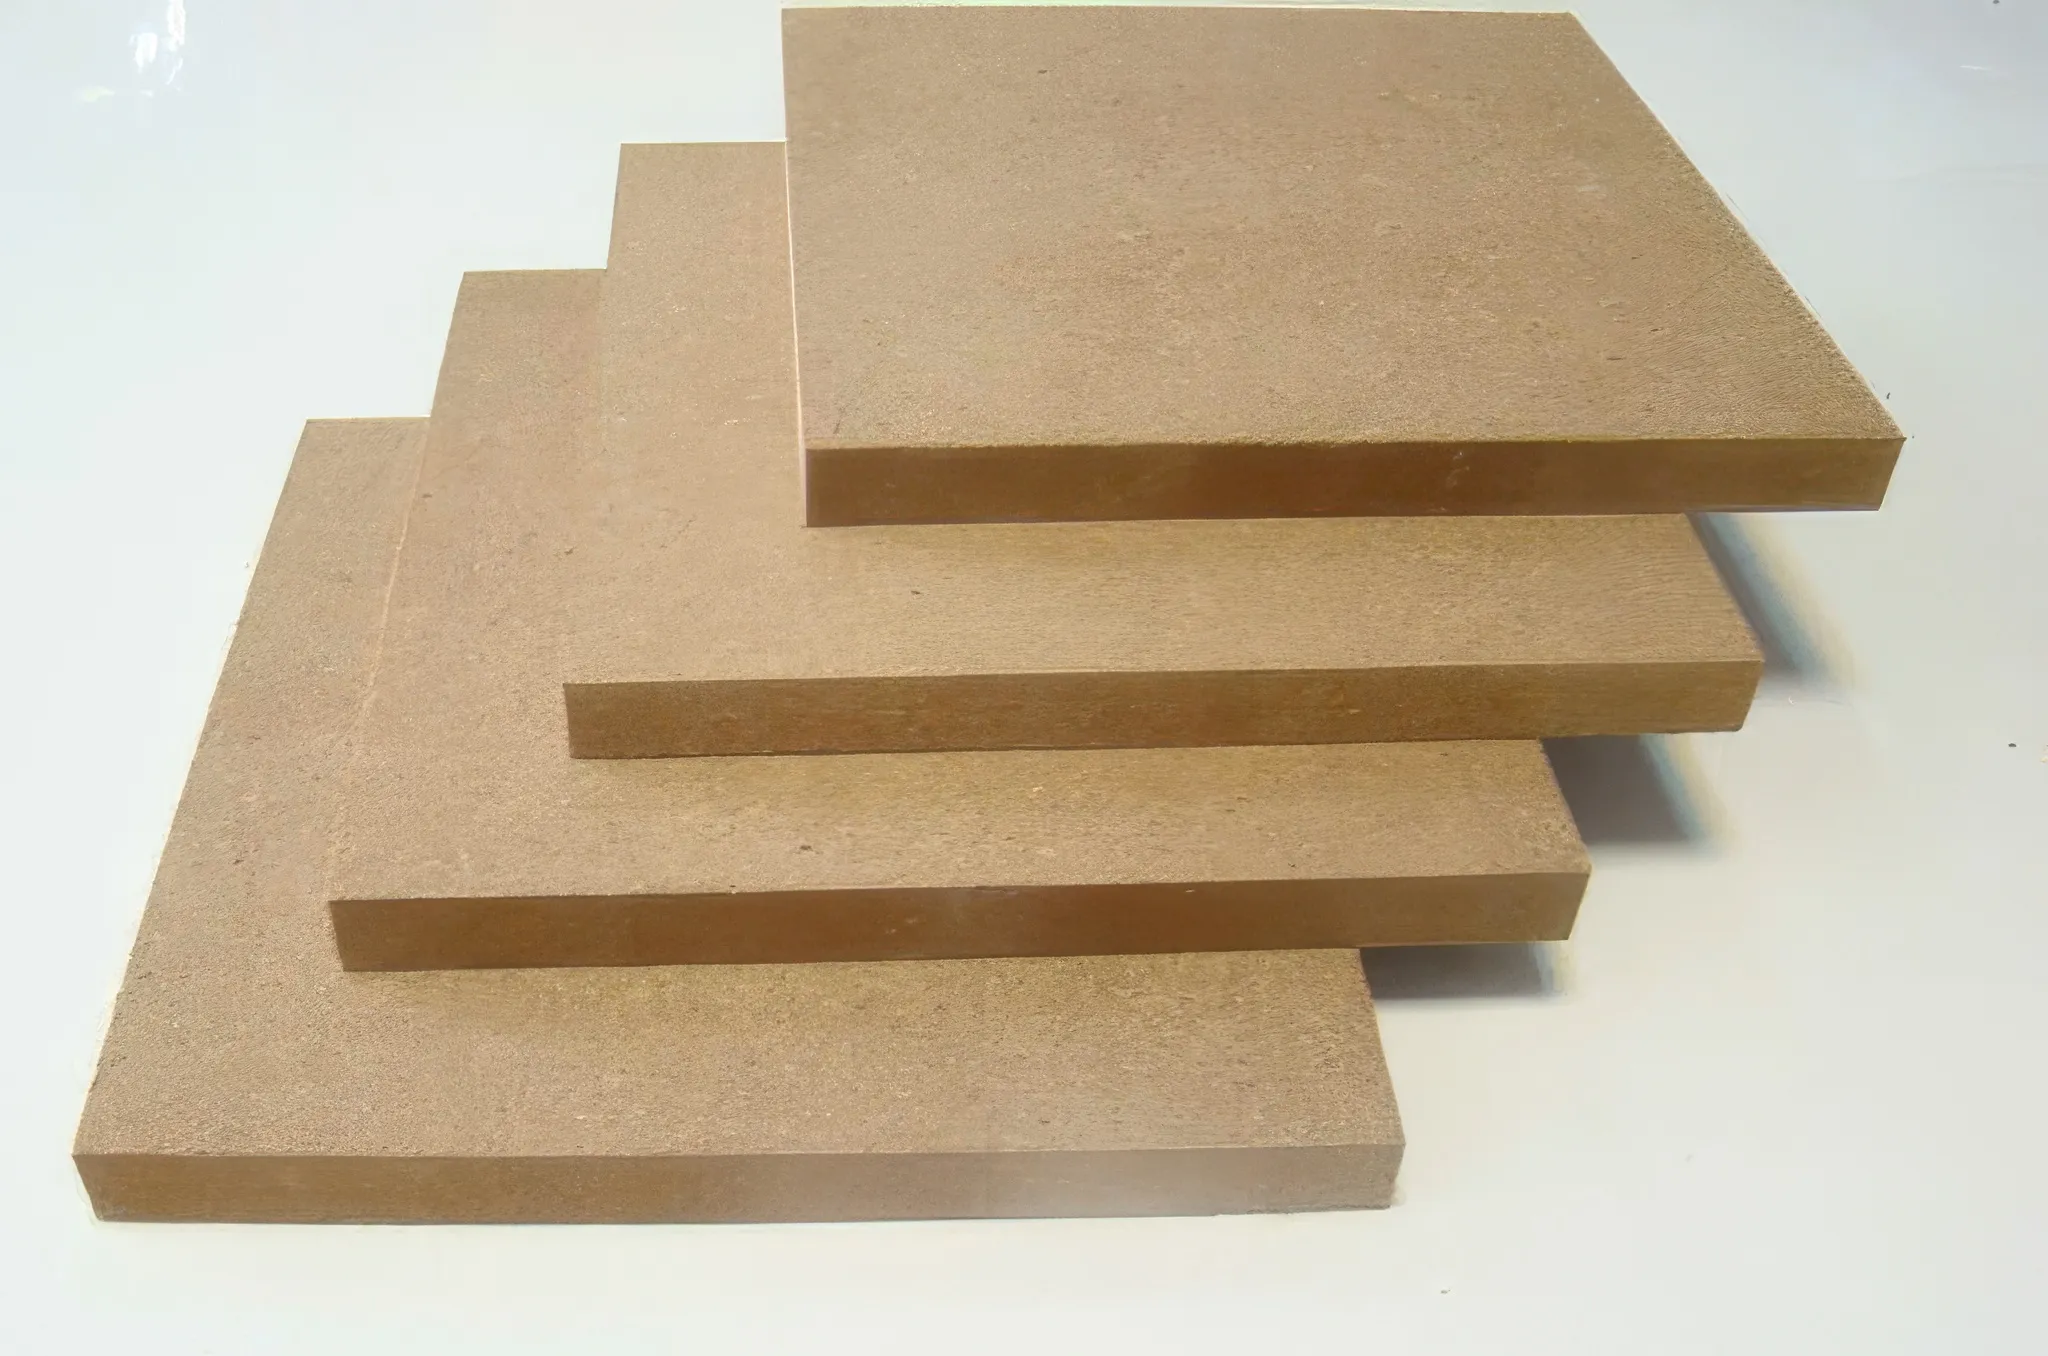 HDF is a composite panel made from compressed wood fibers. It is sturdy and tougher than MDF with an average density of 900 kg/m3.